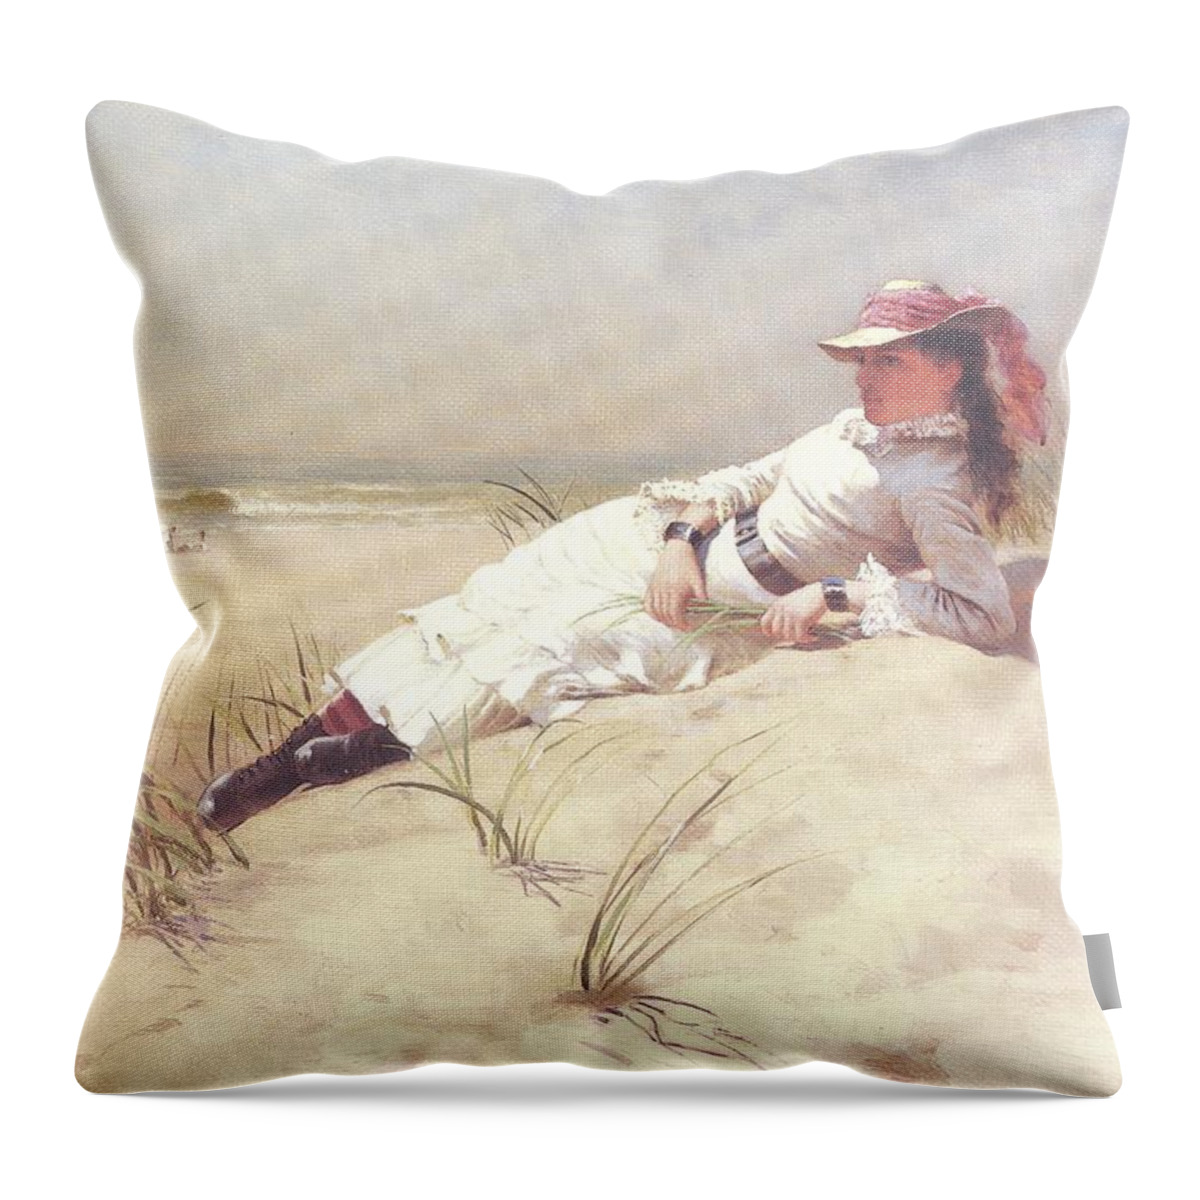 Girl Throw Pillow featuring the painting Sunshine by Reynold Jay